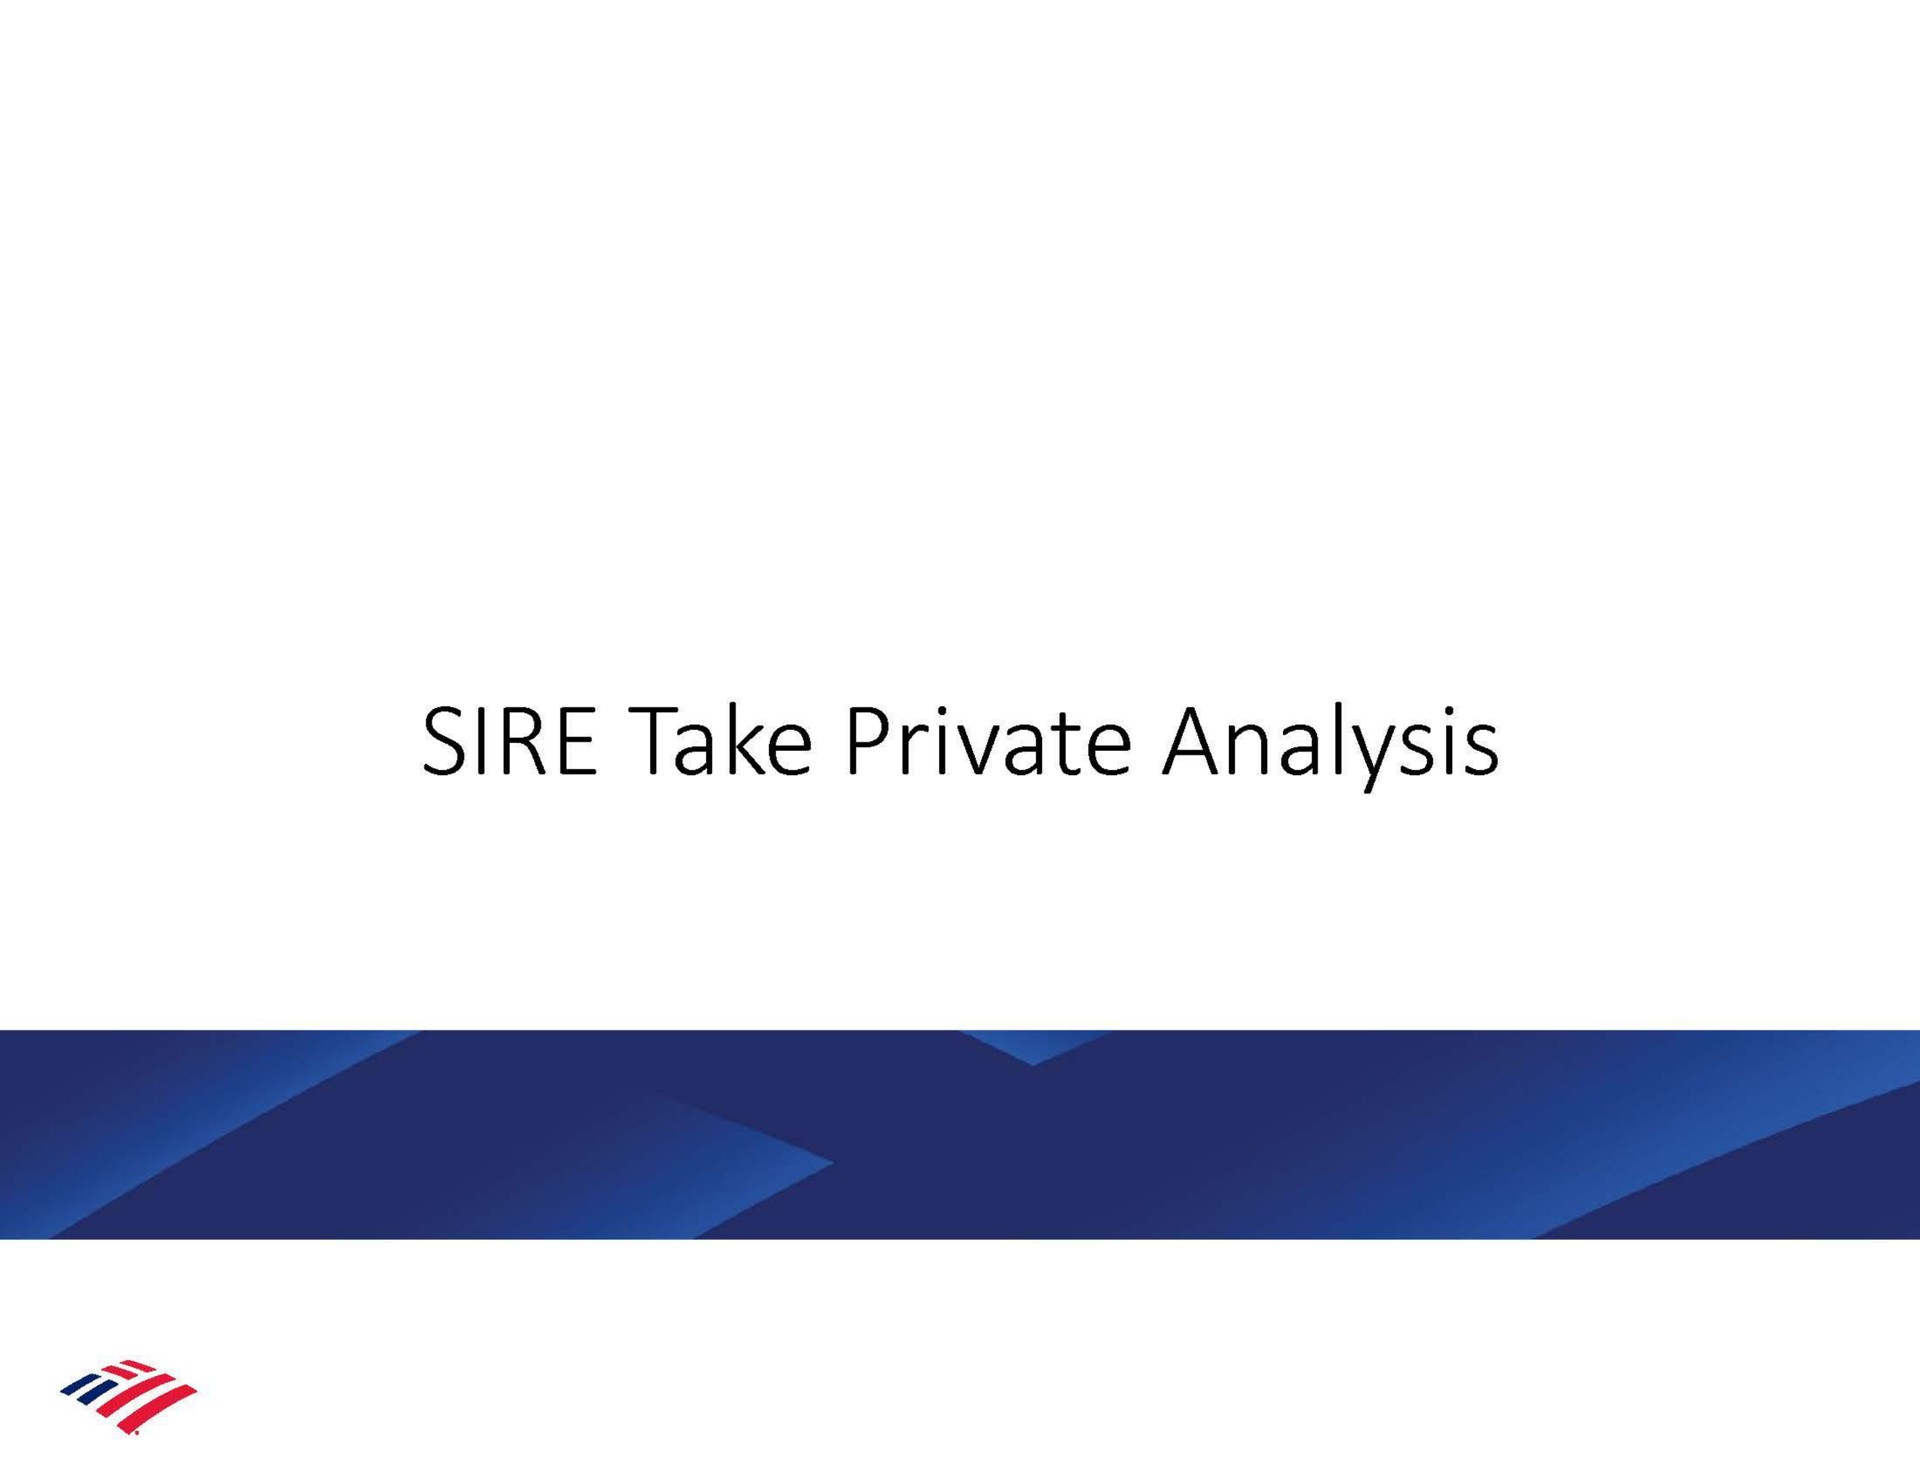 sire take private analysis | Bank of America